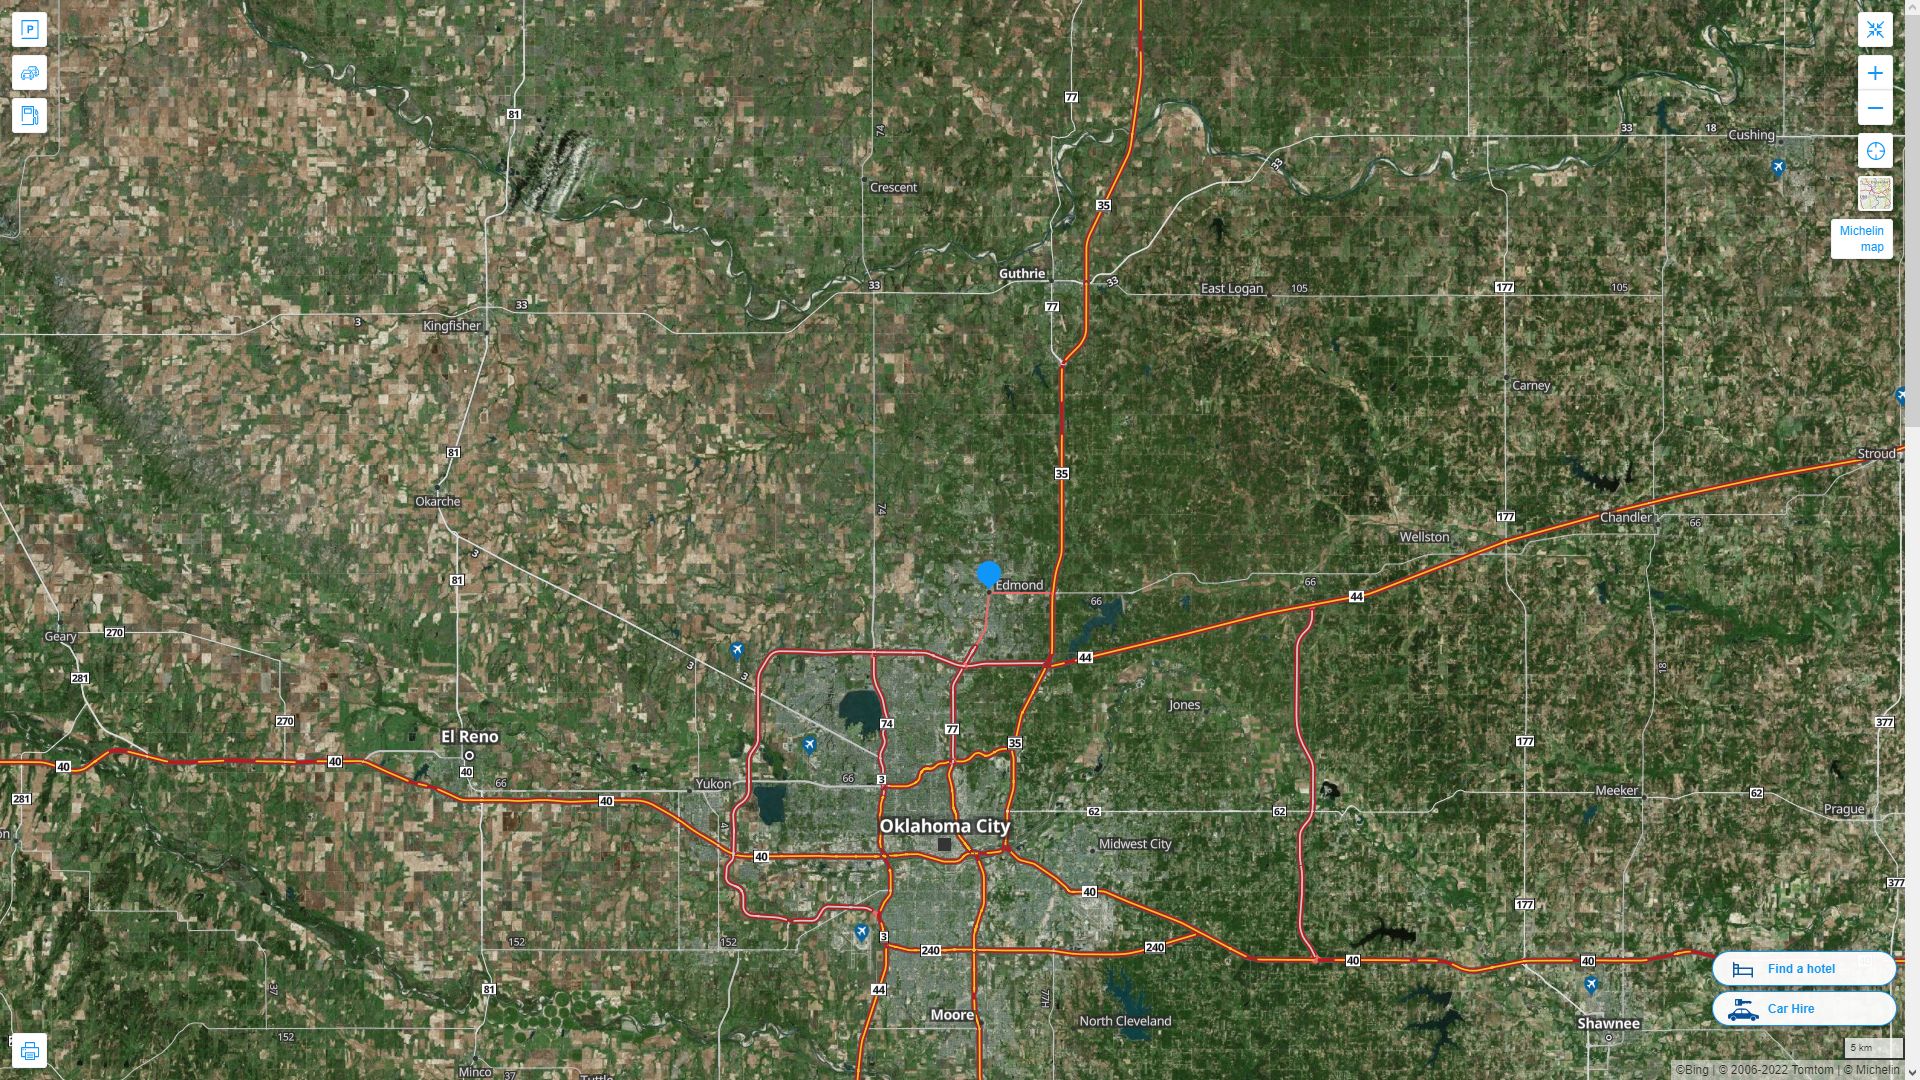 Edmond Oklahoma Highway and Road Map with Satellite View